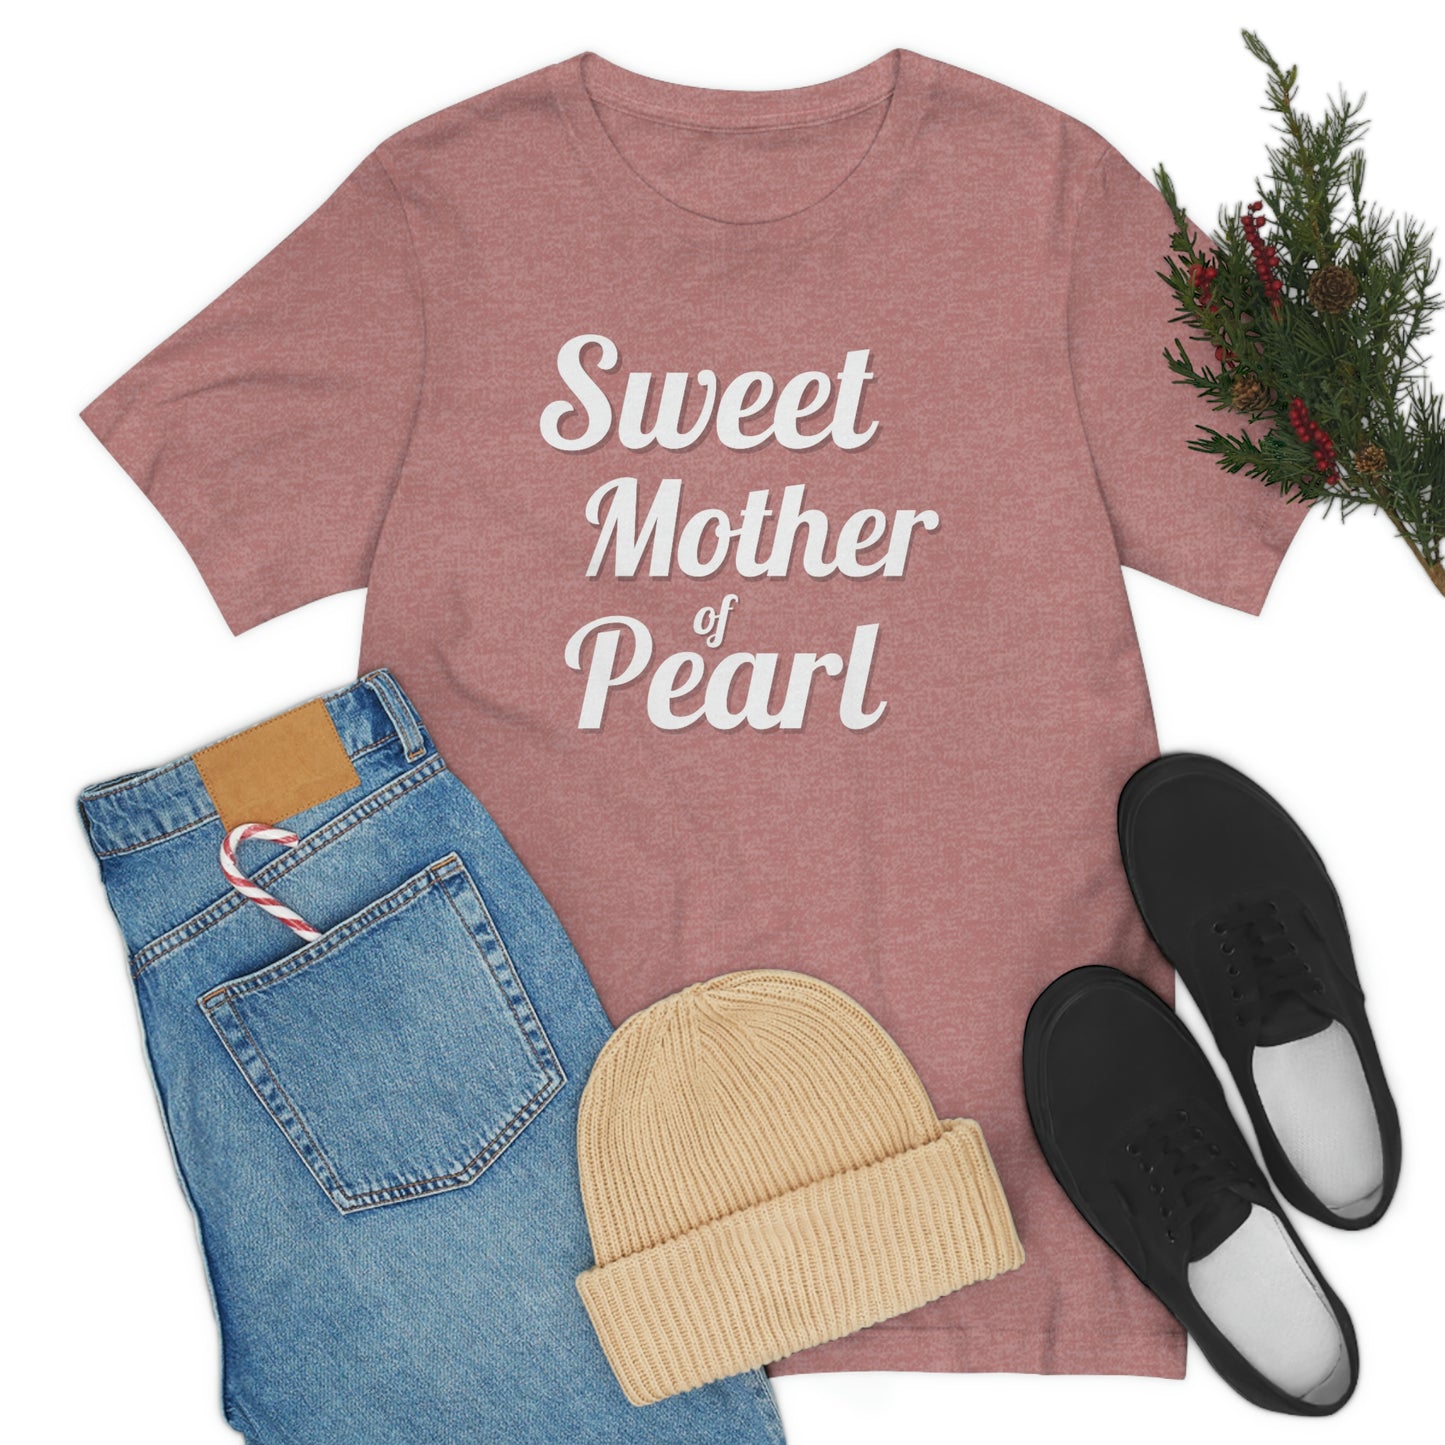 "Sweet Mother of Pearl" Unisex Ultra Cotton Tee